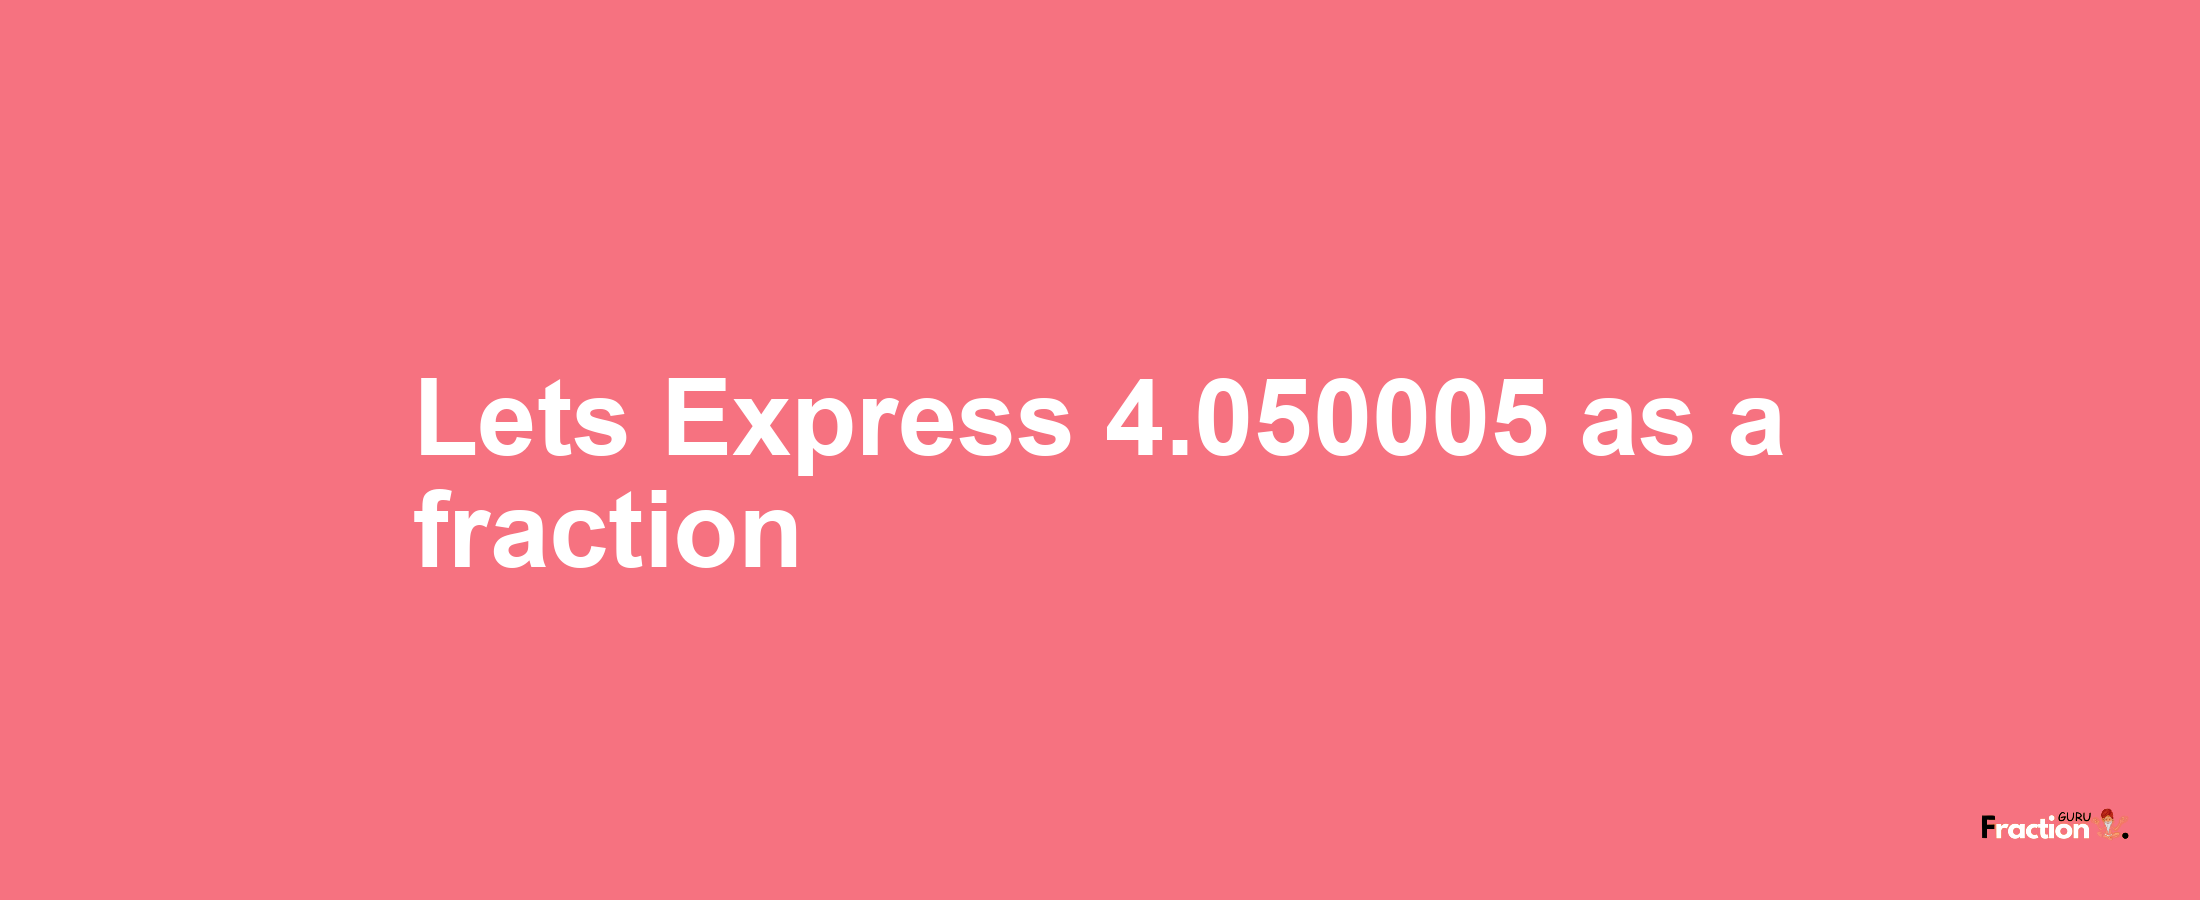 Lets Express 4.050005 as afraction